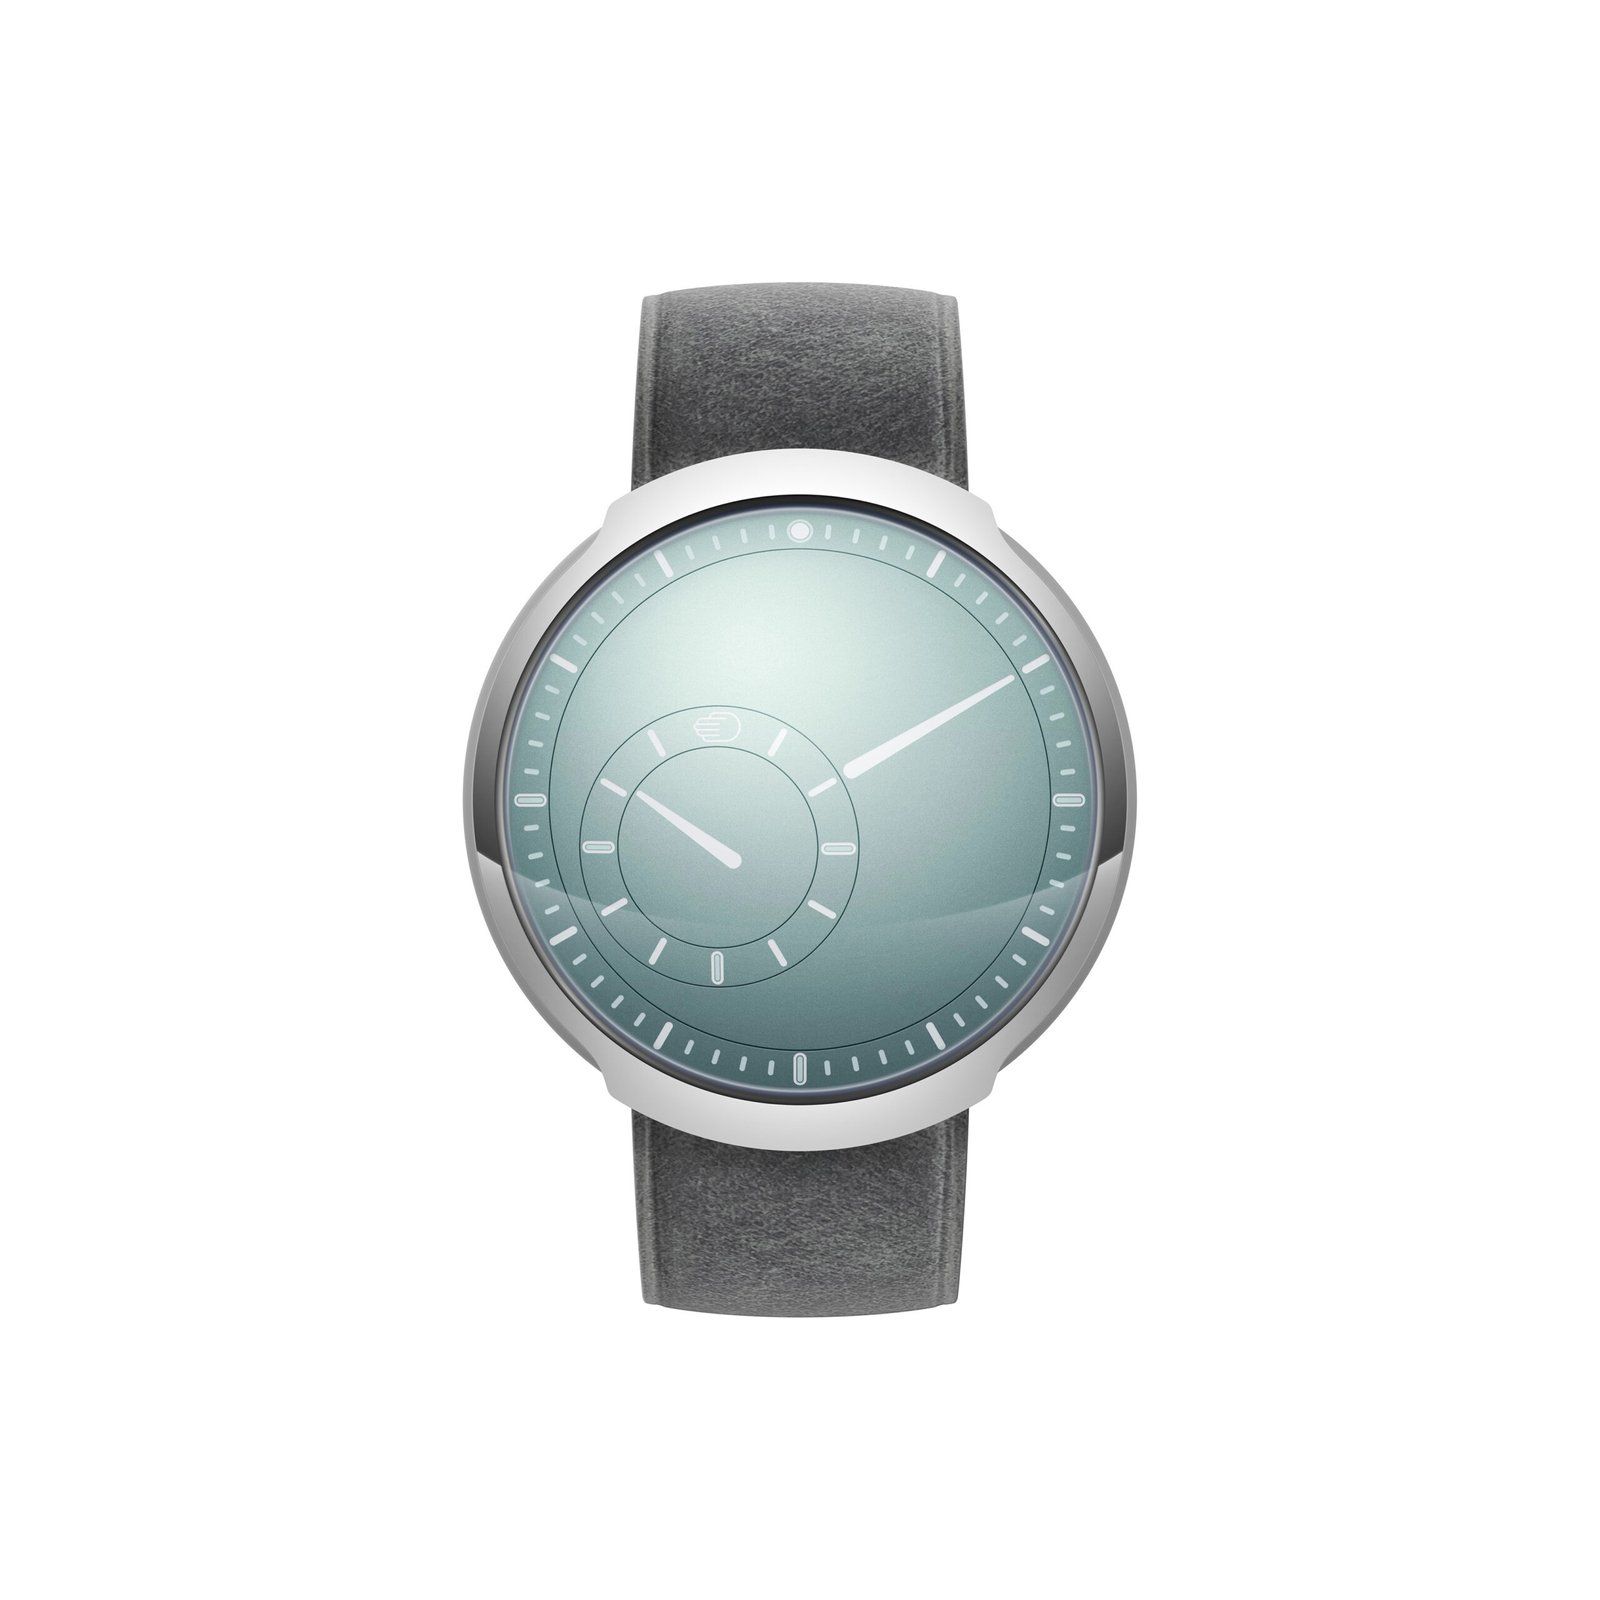 The Ressence Type 8 S is an epitome of minimalistic architecture